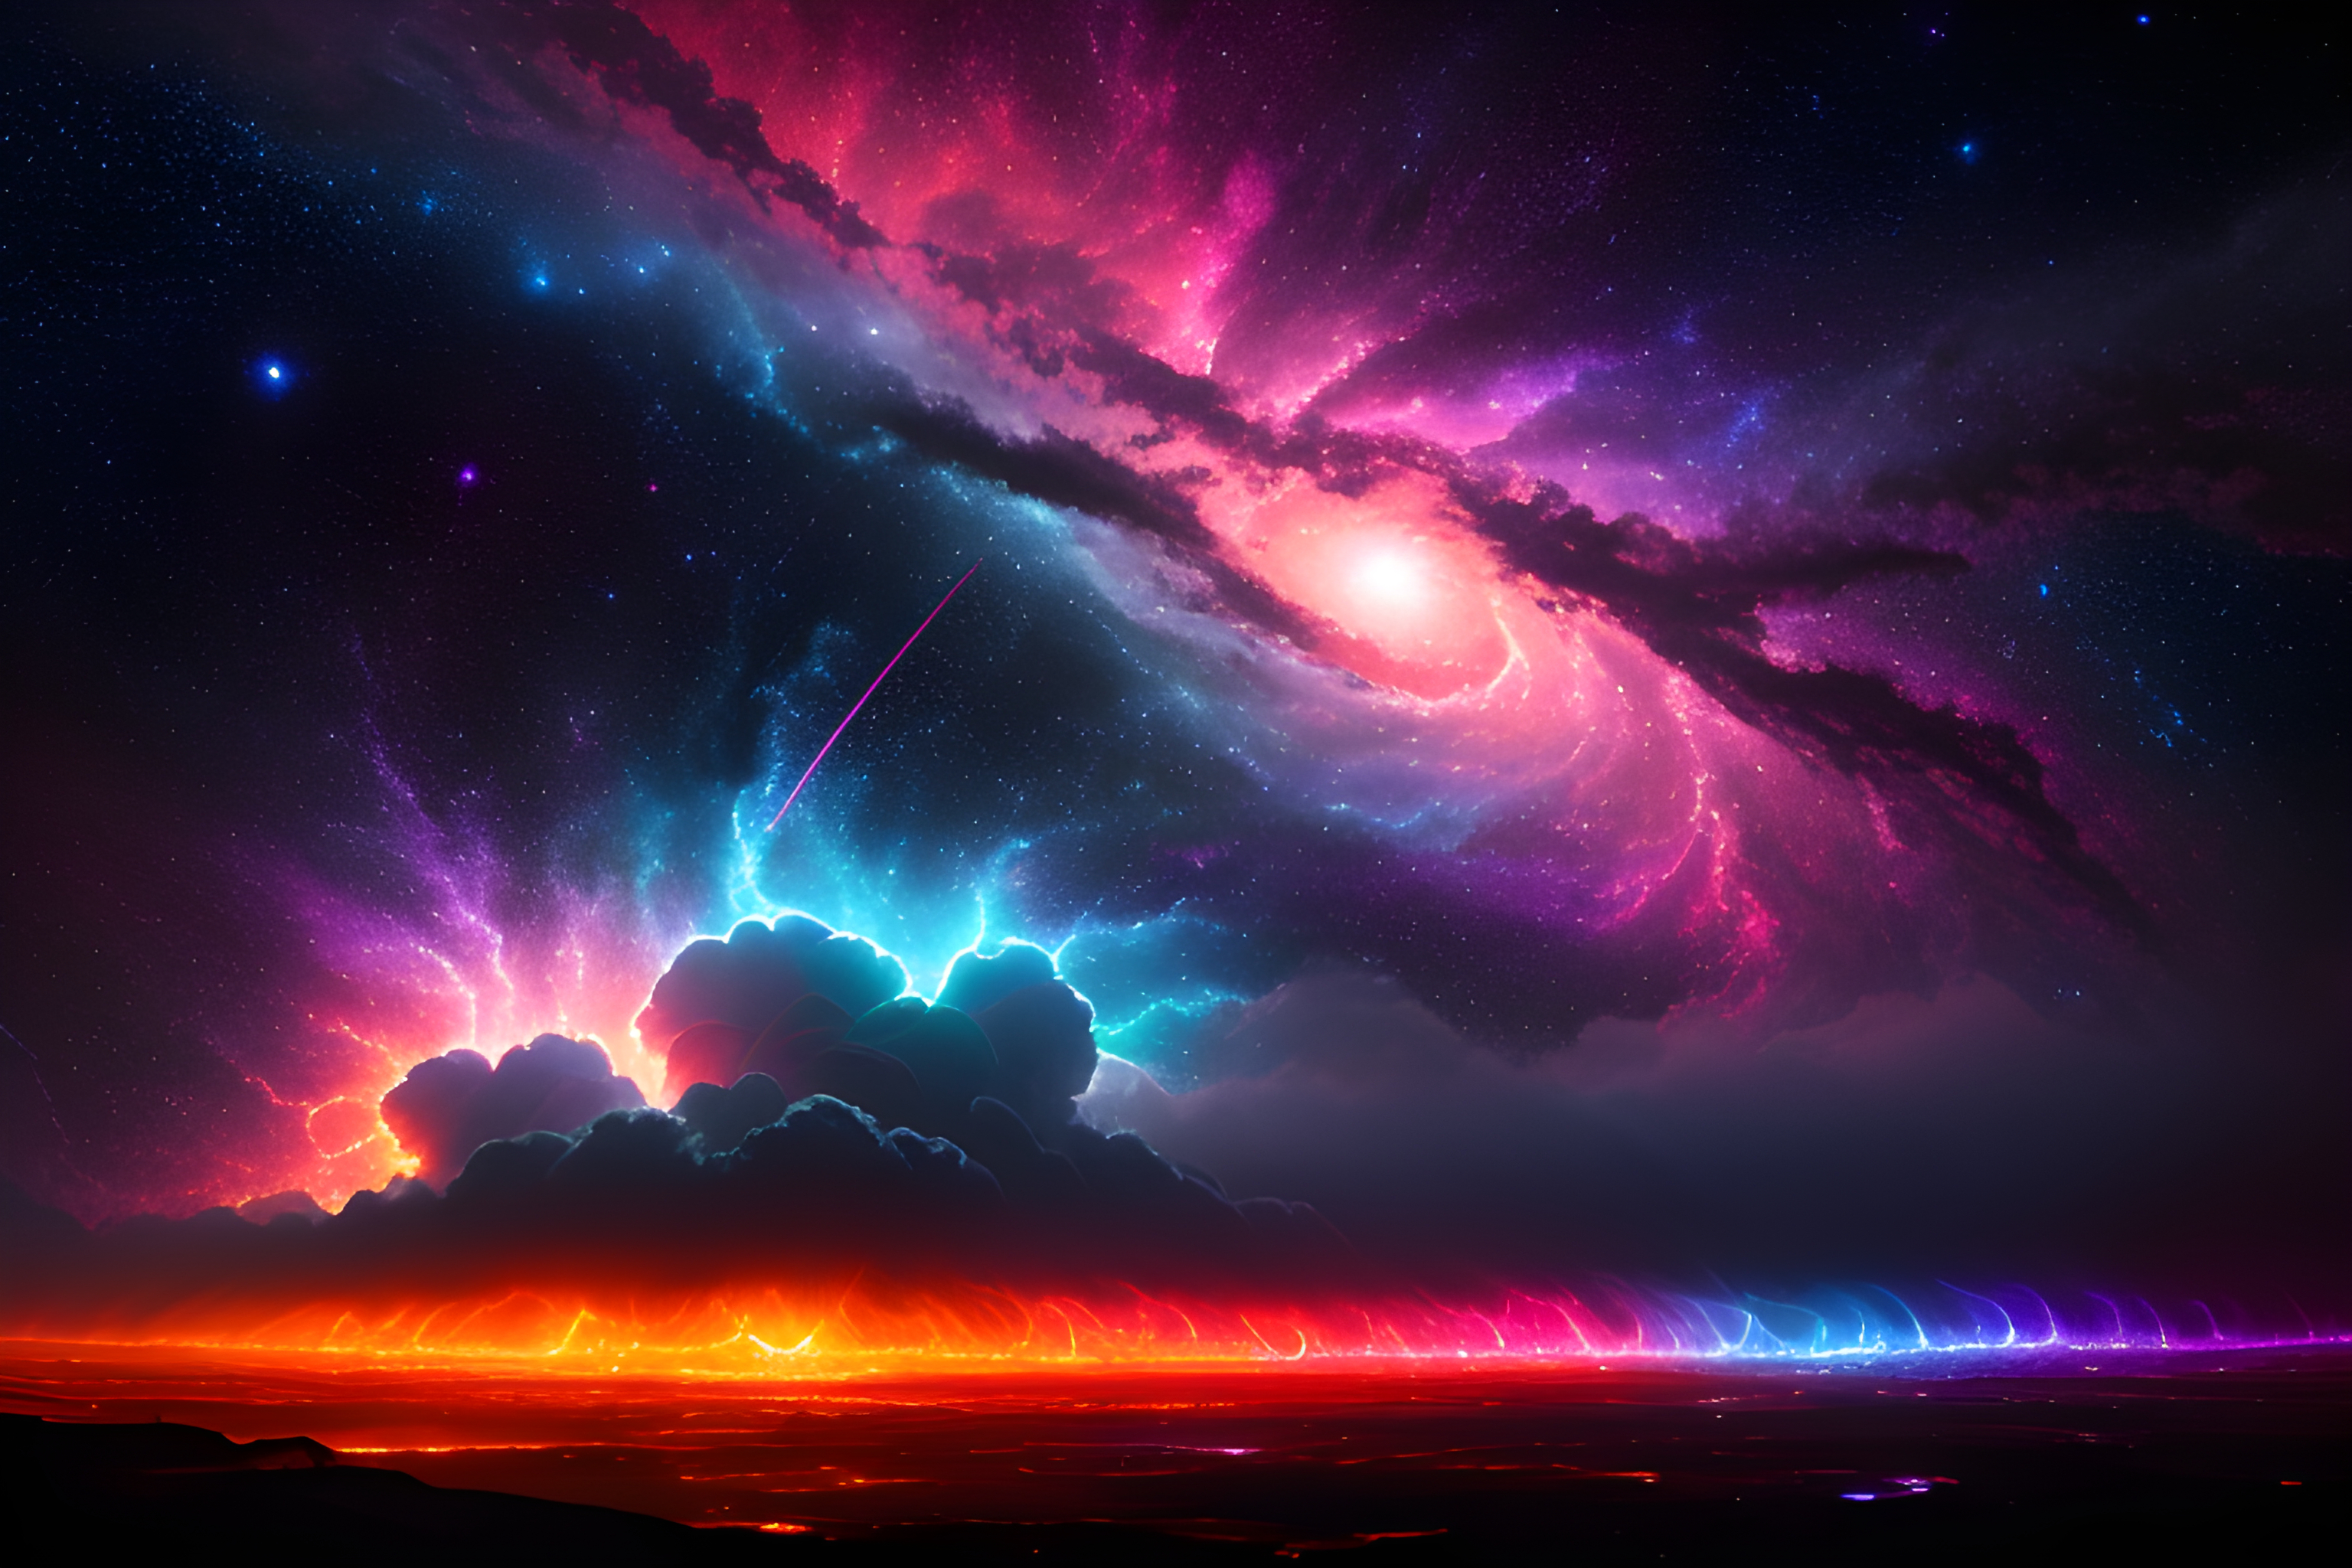 Galaxy Theme of Planets Wallpapers on WallpaperDog